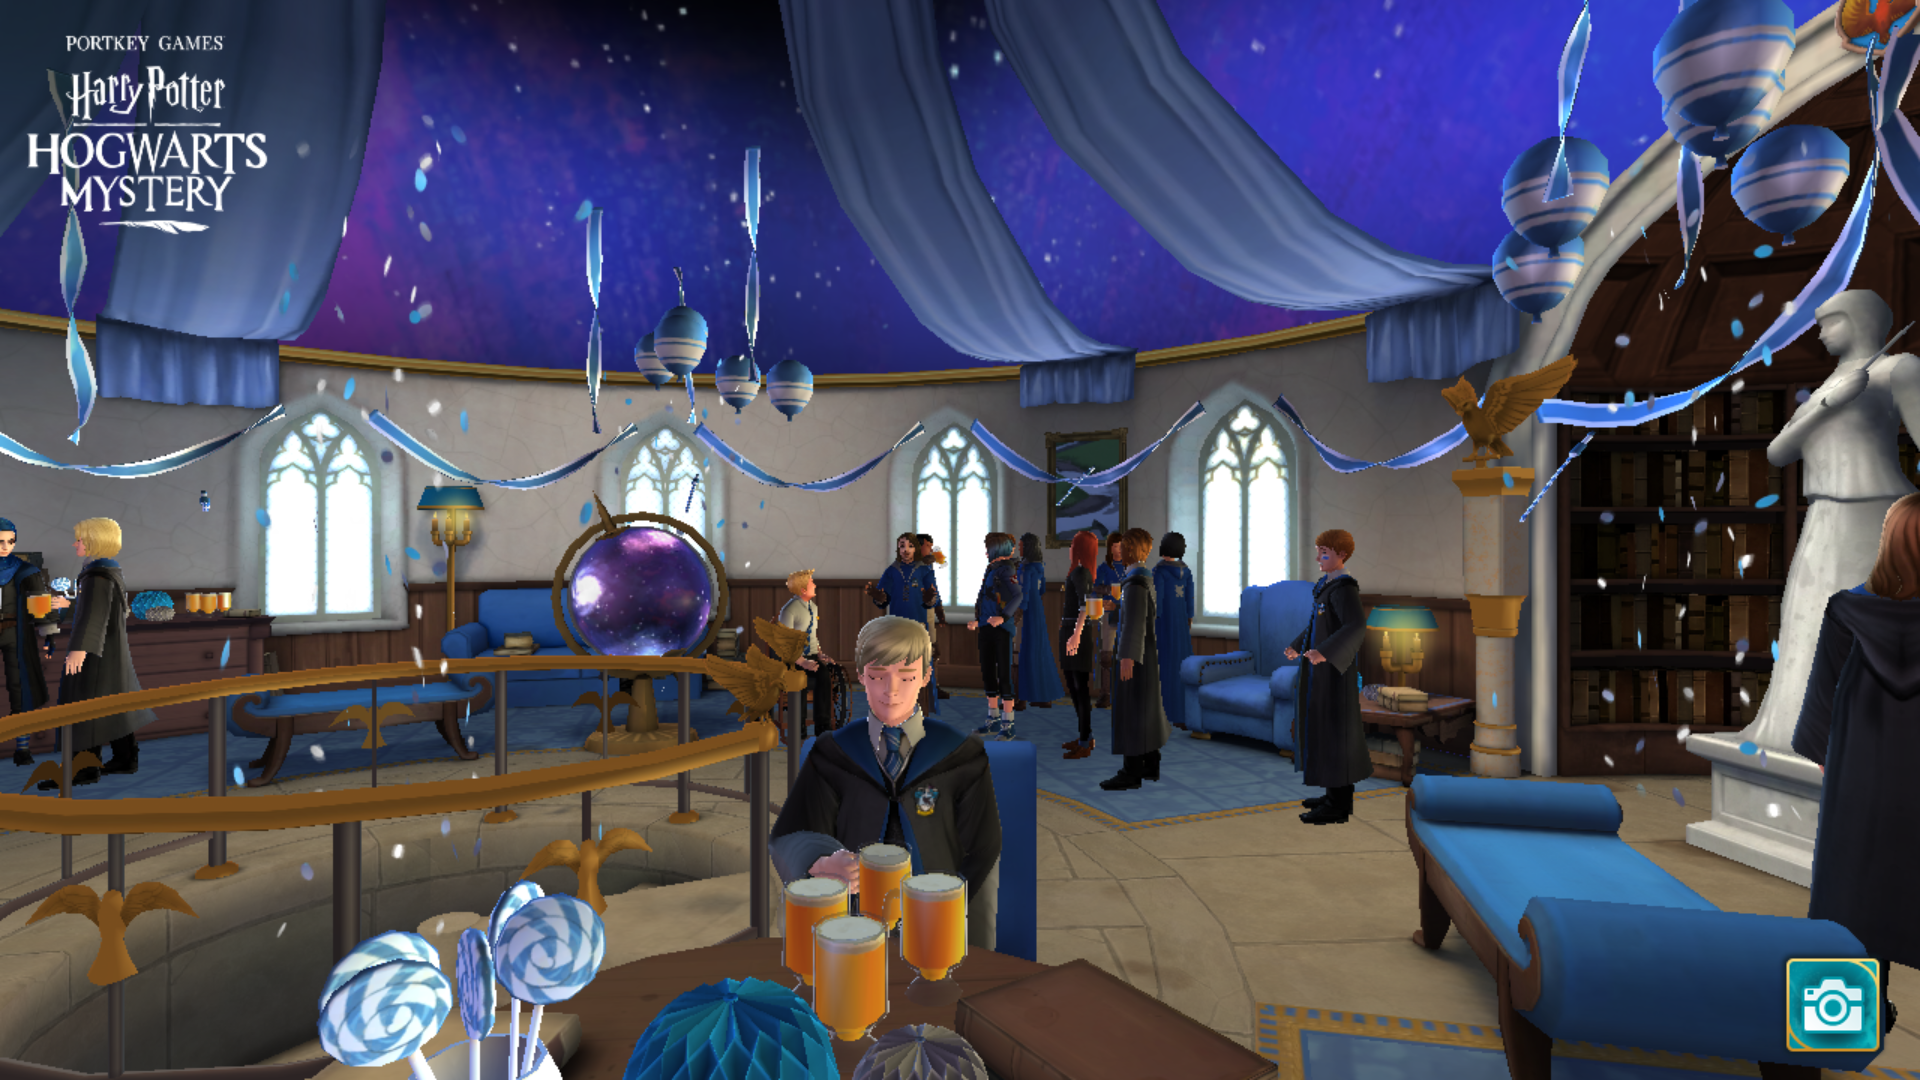 The Ravenclaw Common Room looks beautiful!!